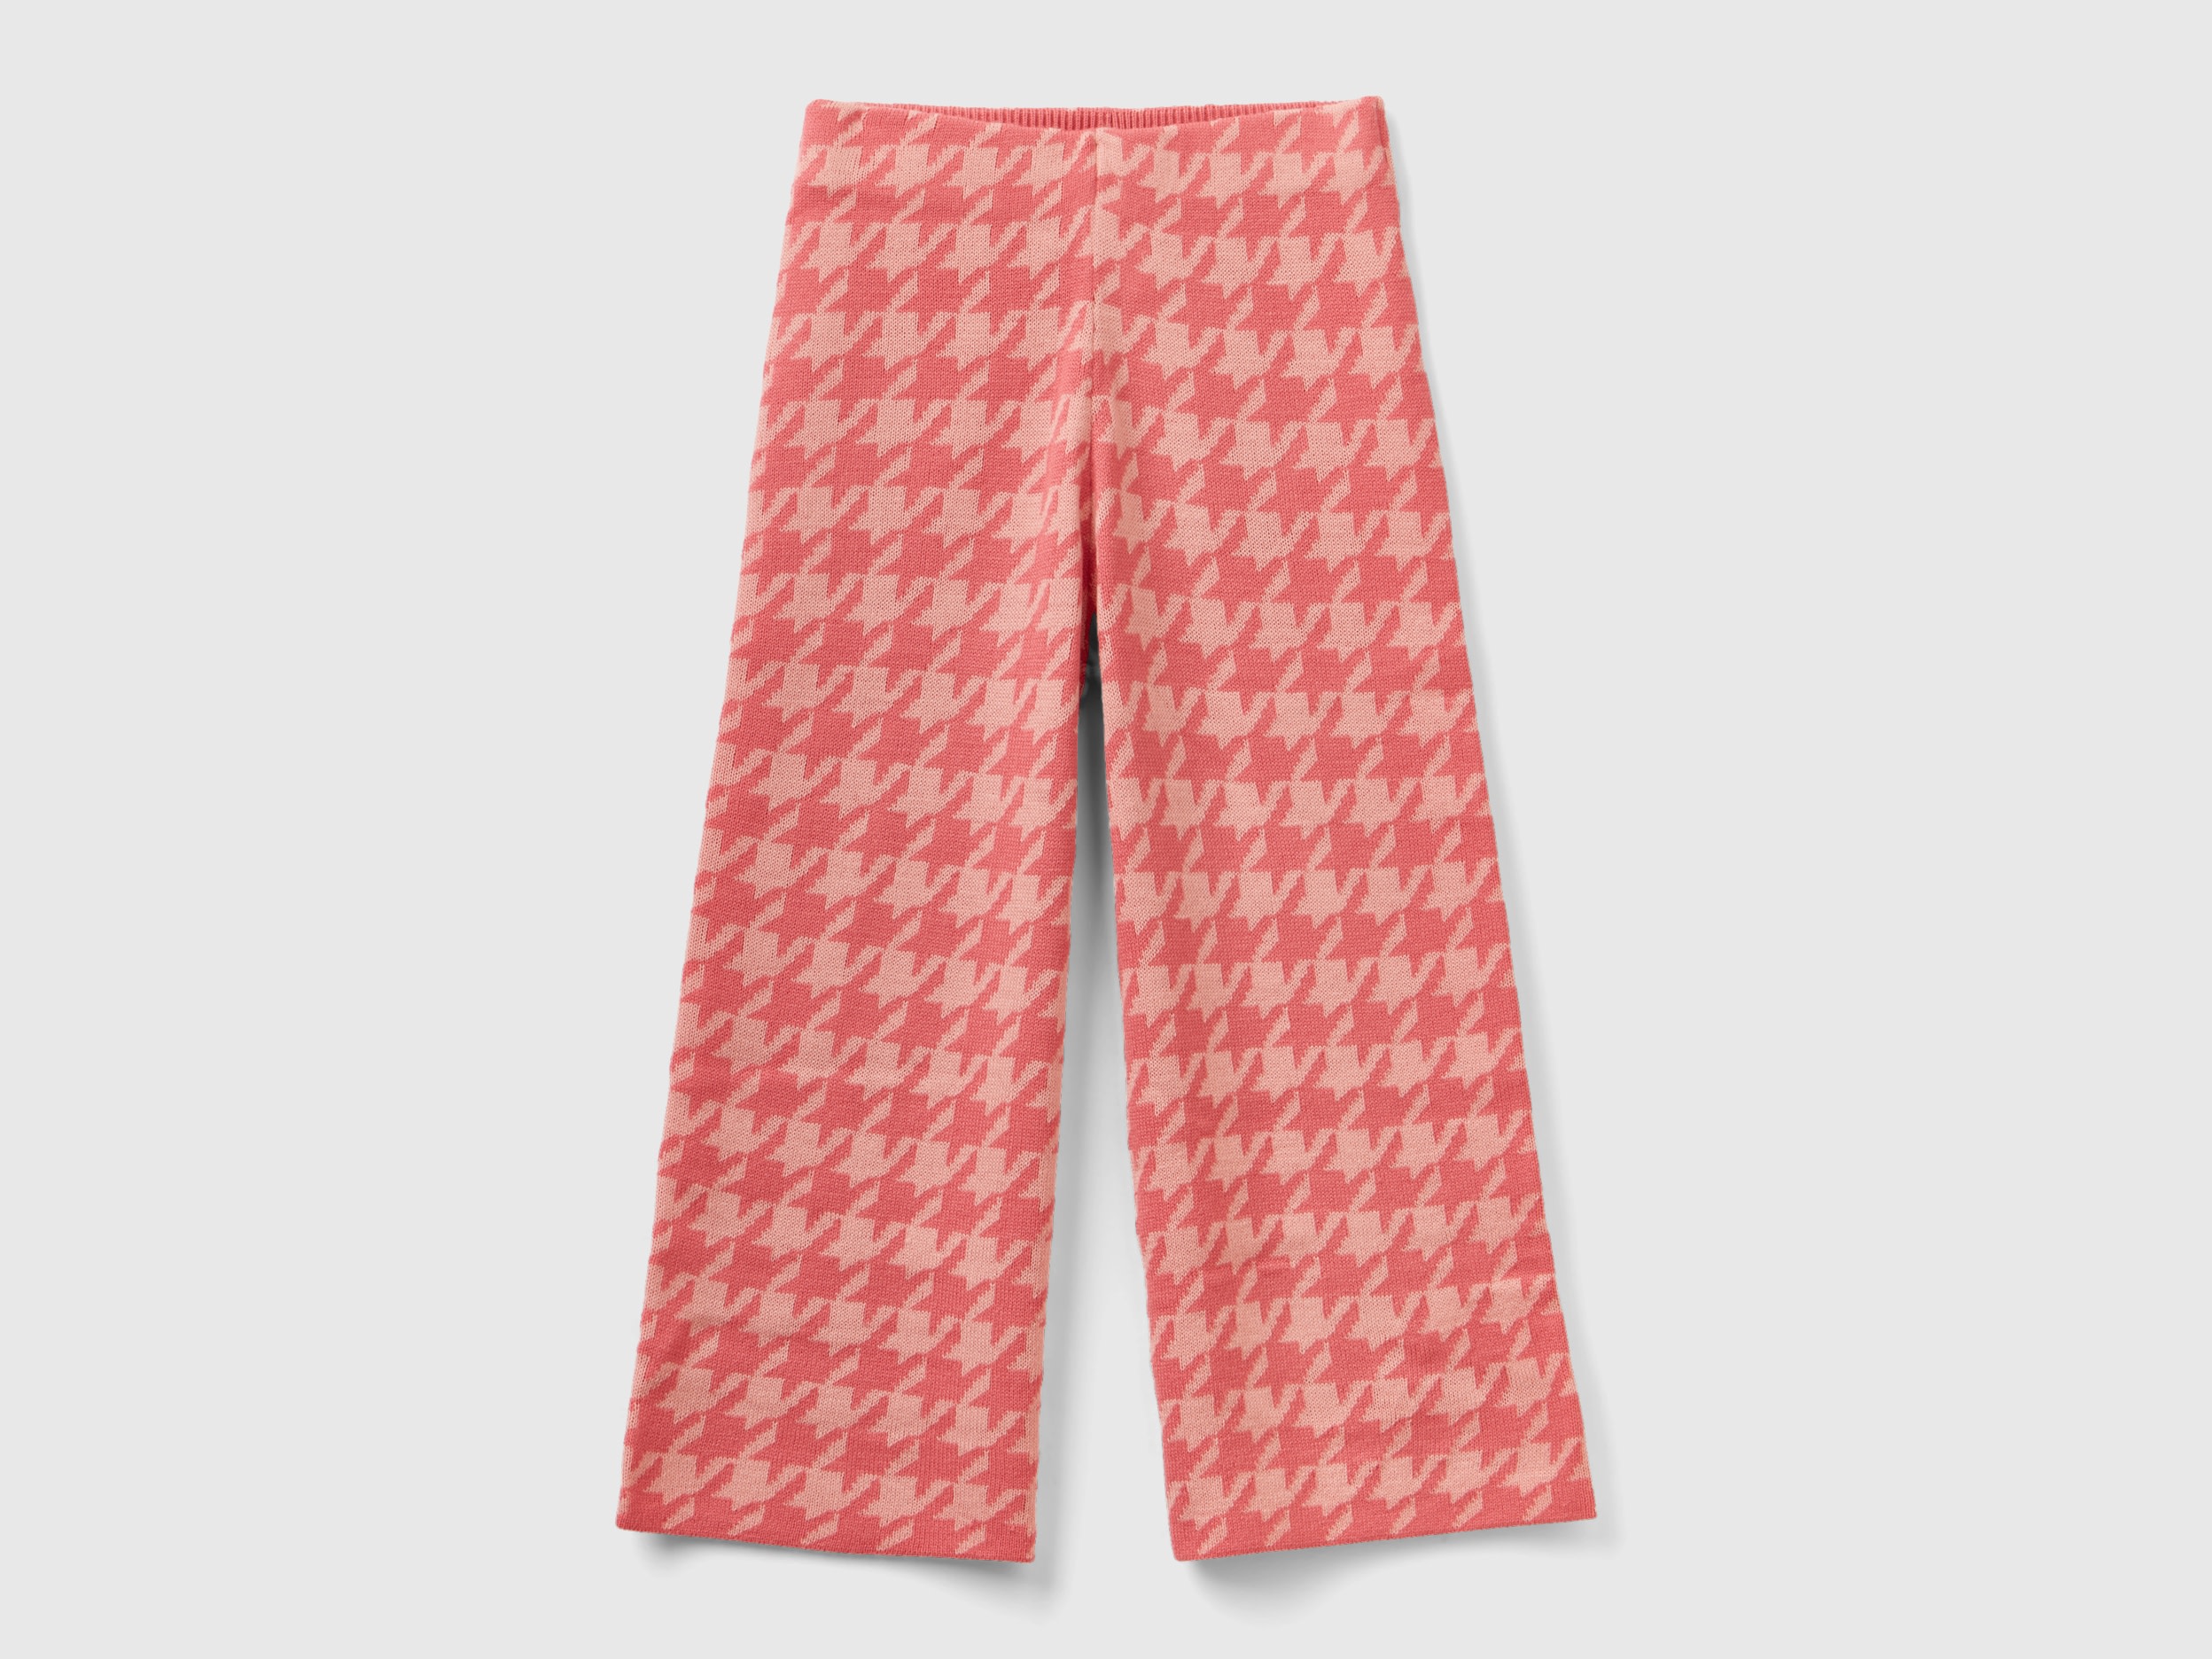 Benetton, Knit Houndstooth Trousers, size M, Pink, Kids